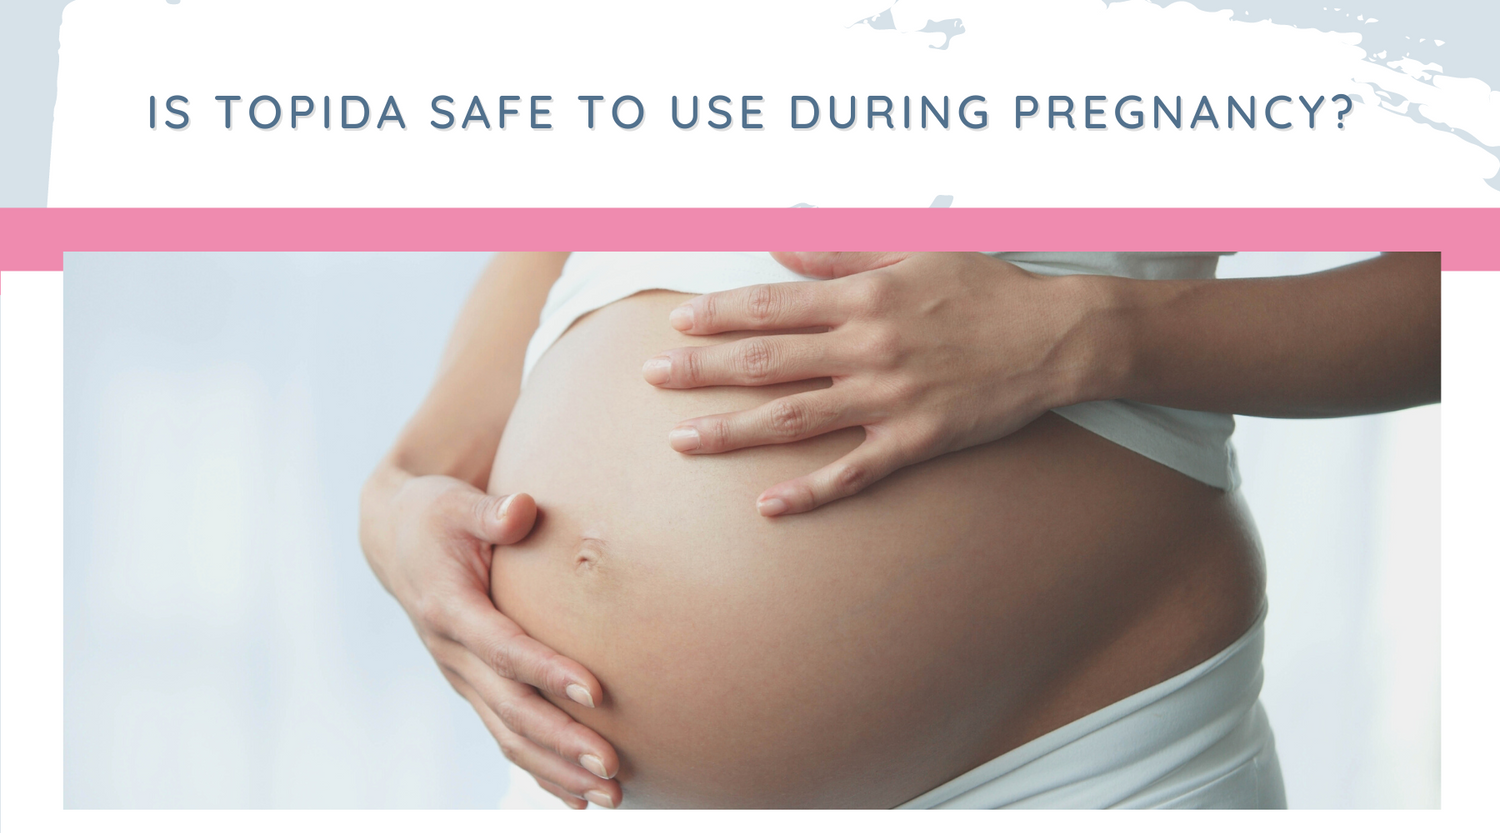 Is Topida safe to use during pregnancy?